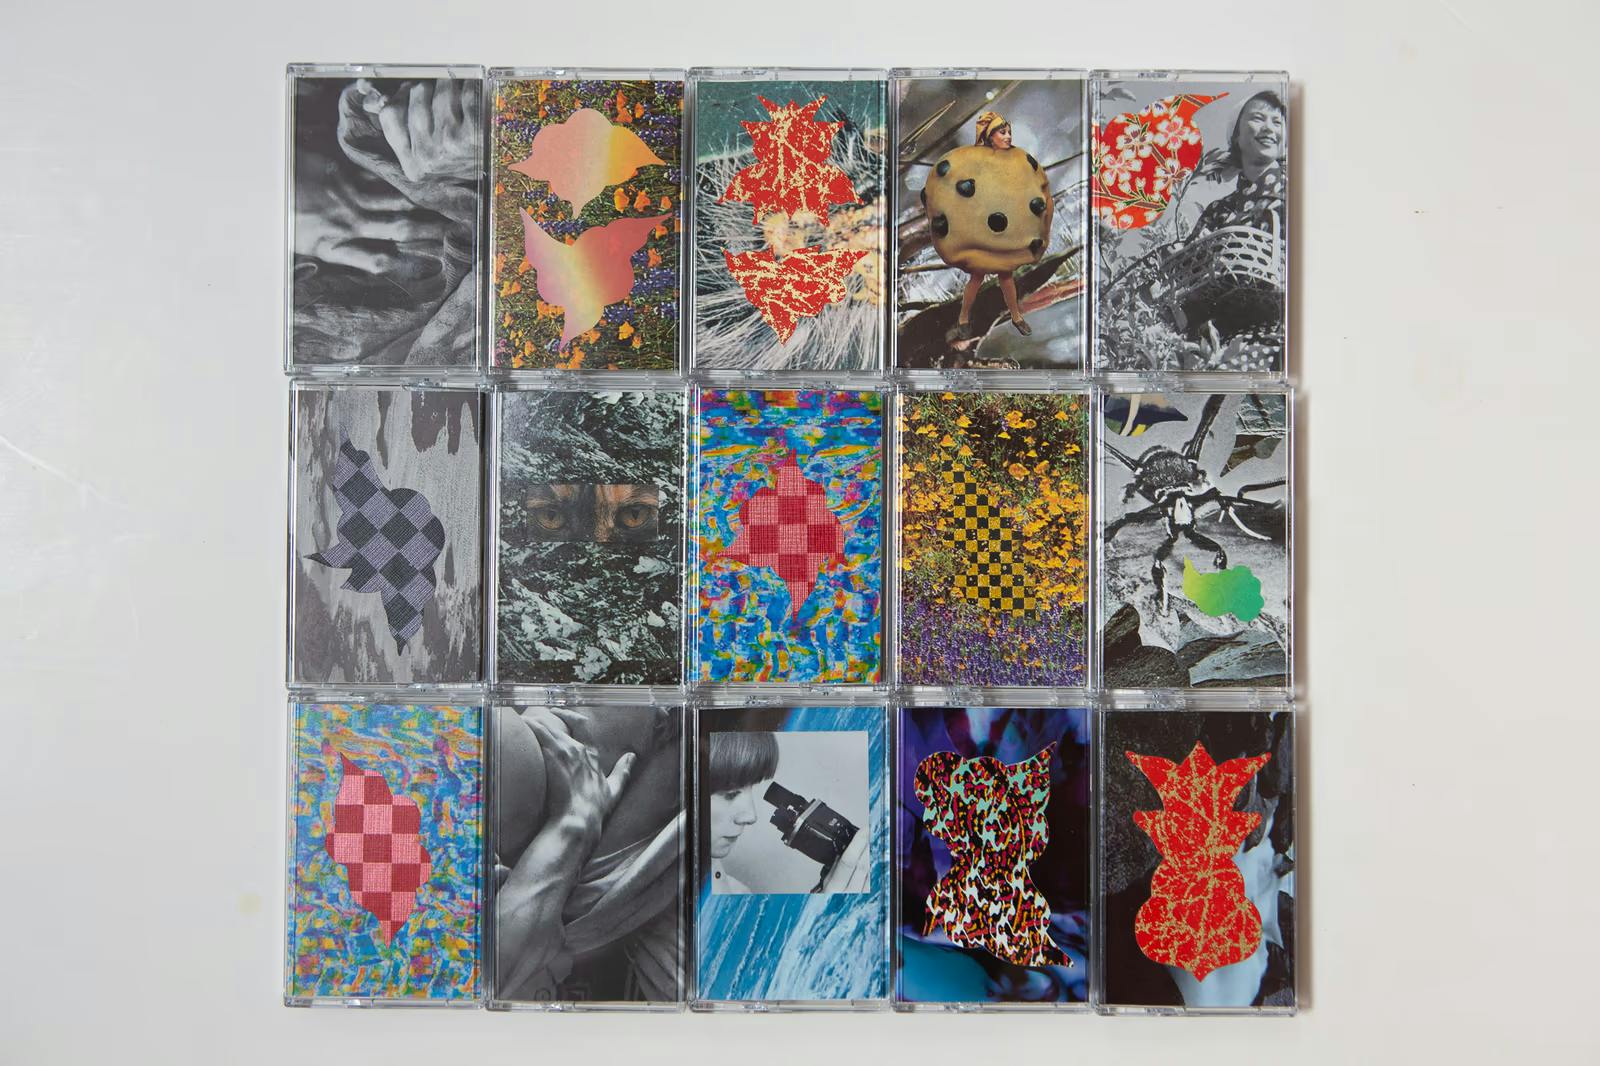 A photo of 15 cassettes, ech with different artwork on the cover, lined up in a grid.